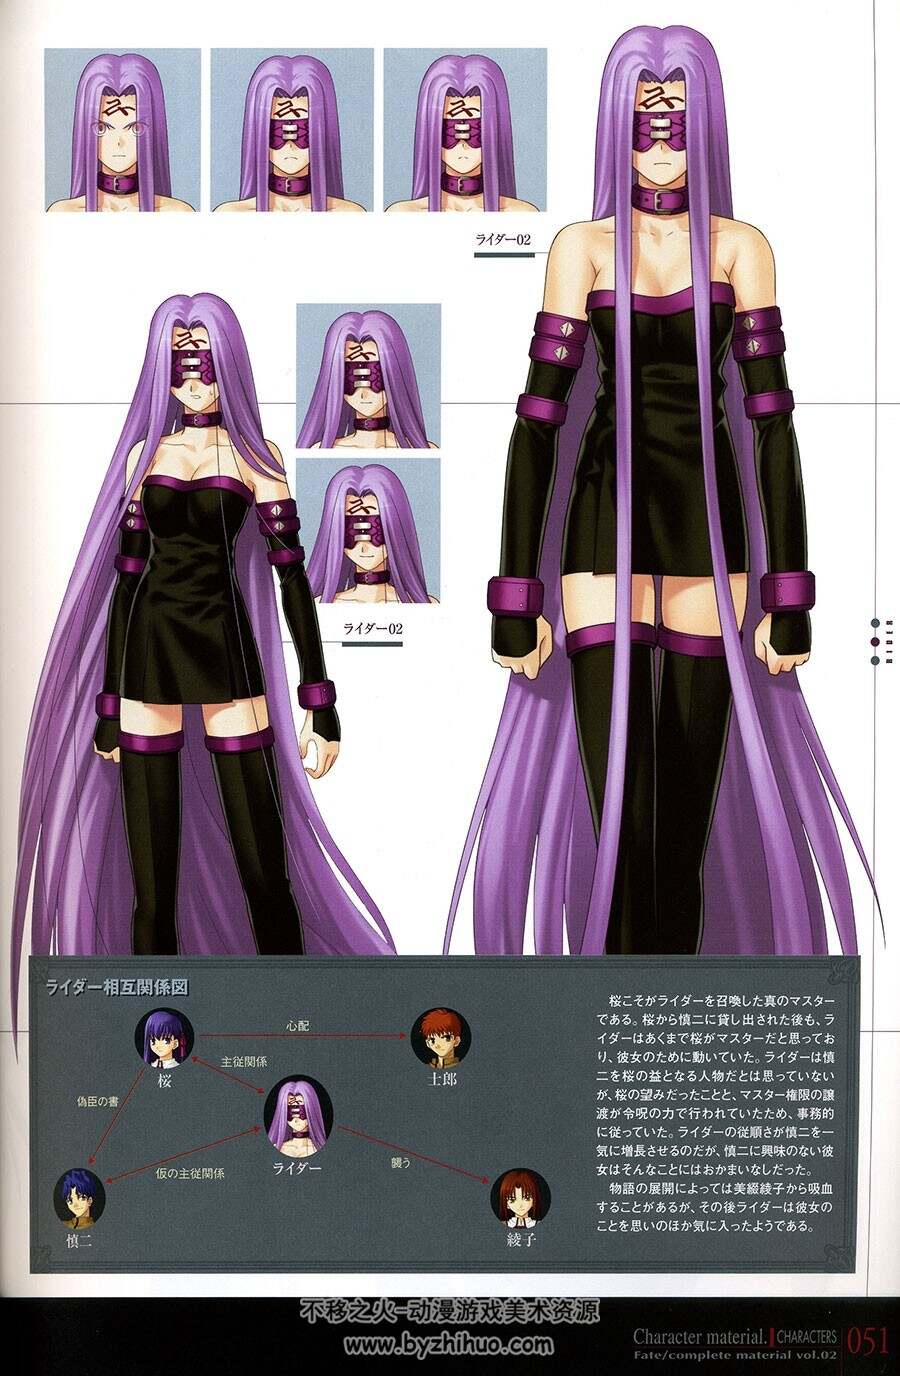 Fate complete material II - Character material 设定原画集 2